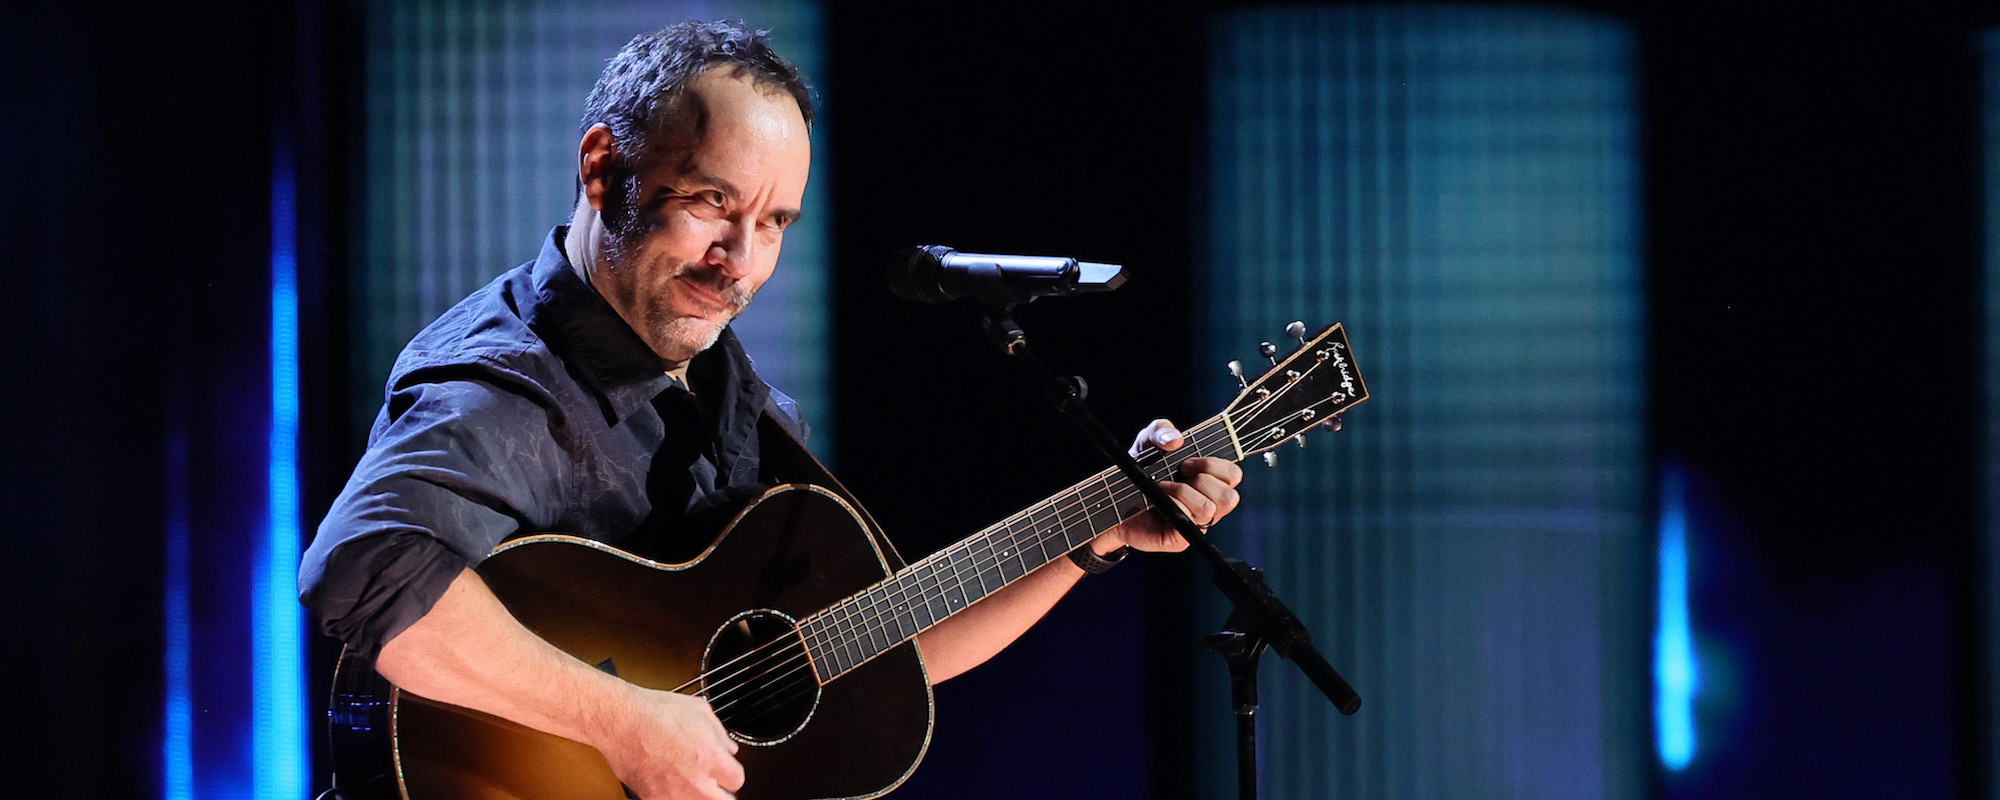 The Story Behind Jay-Z’s Favorite Dave Matthews Band Song “Crush”